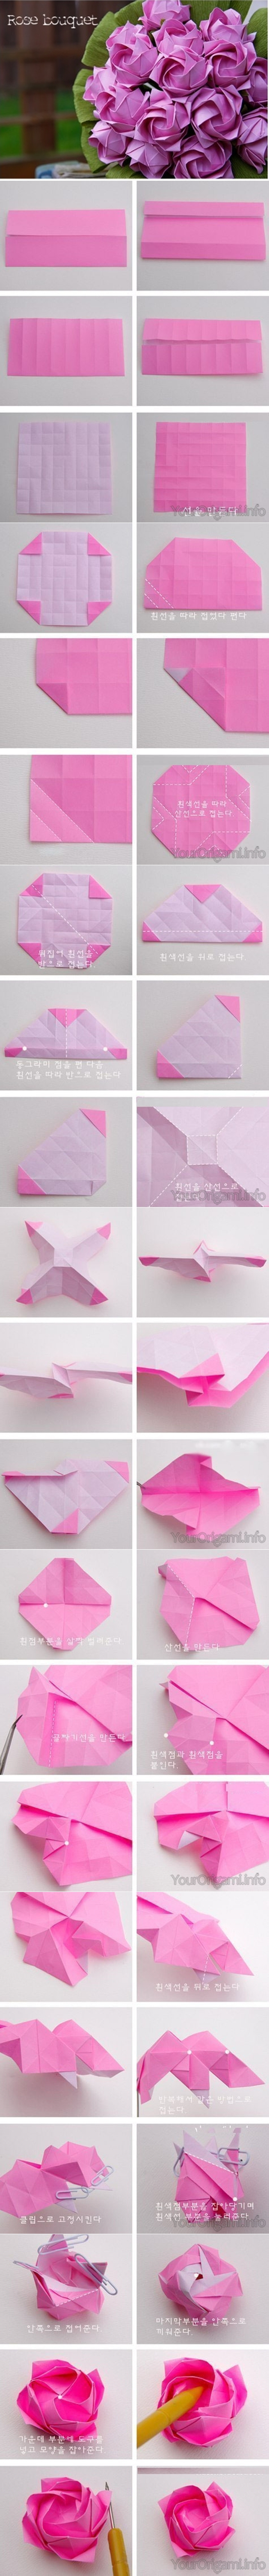 How To Make A Flower Origami Step By Step 88 How To Make Paper Roses Origami Step Step Step 1 Ci Lia